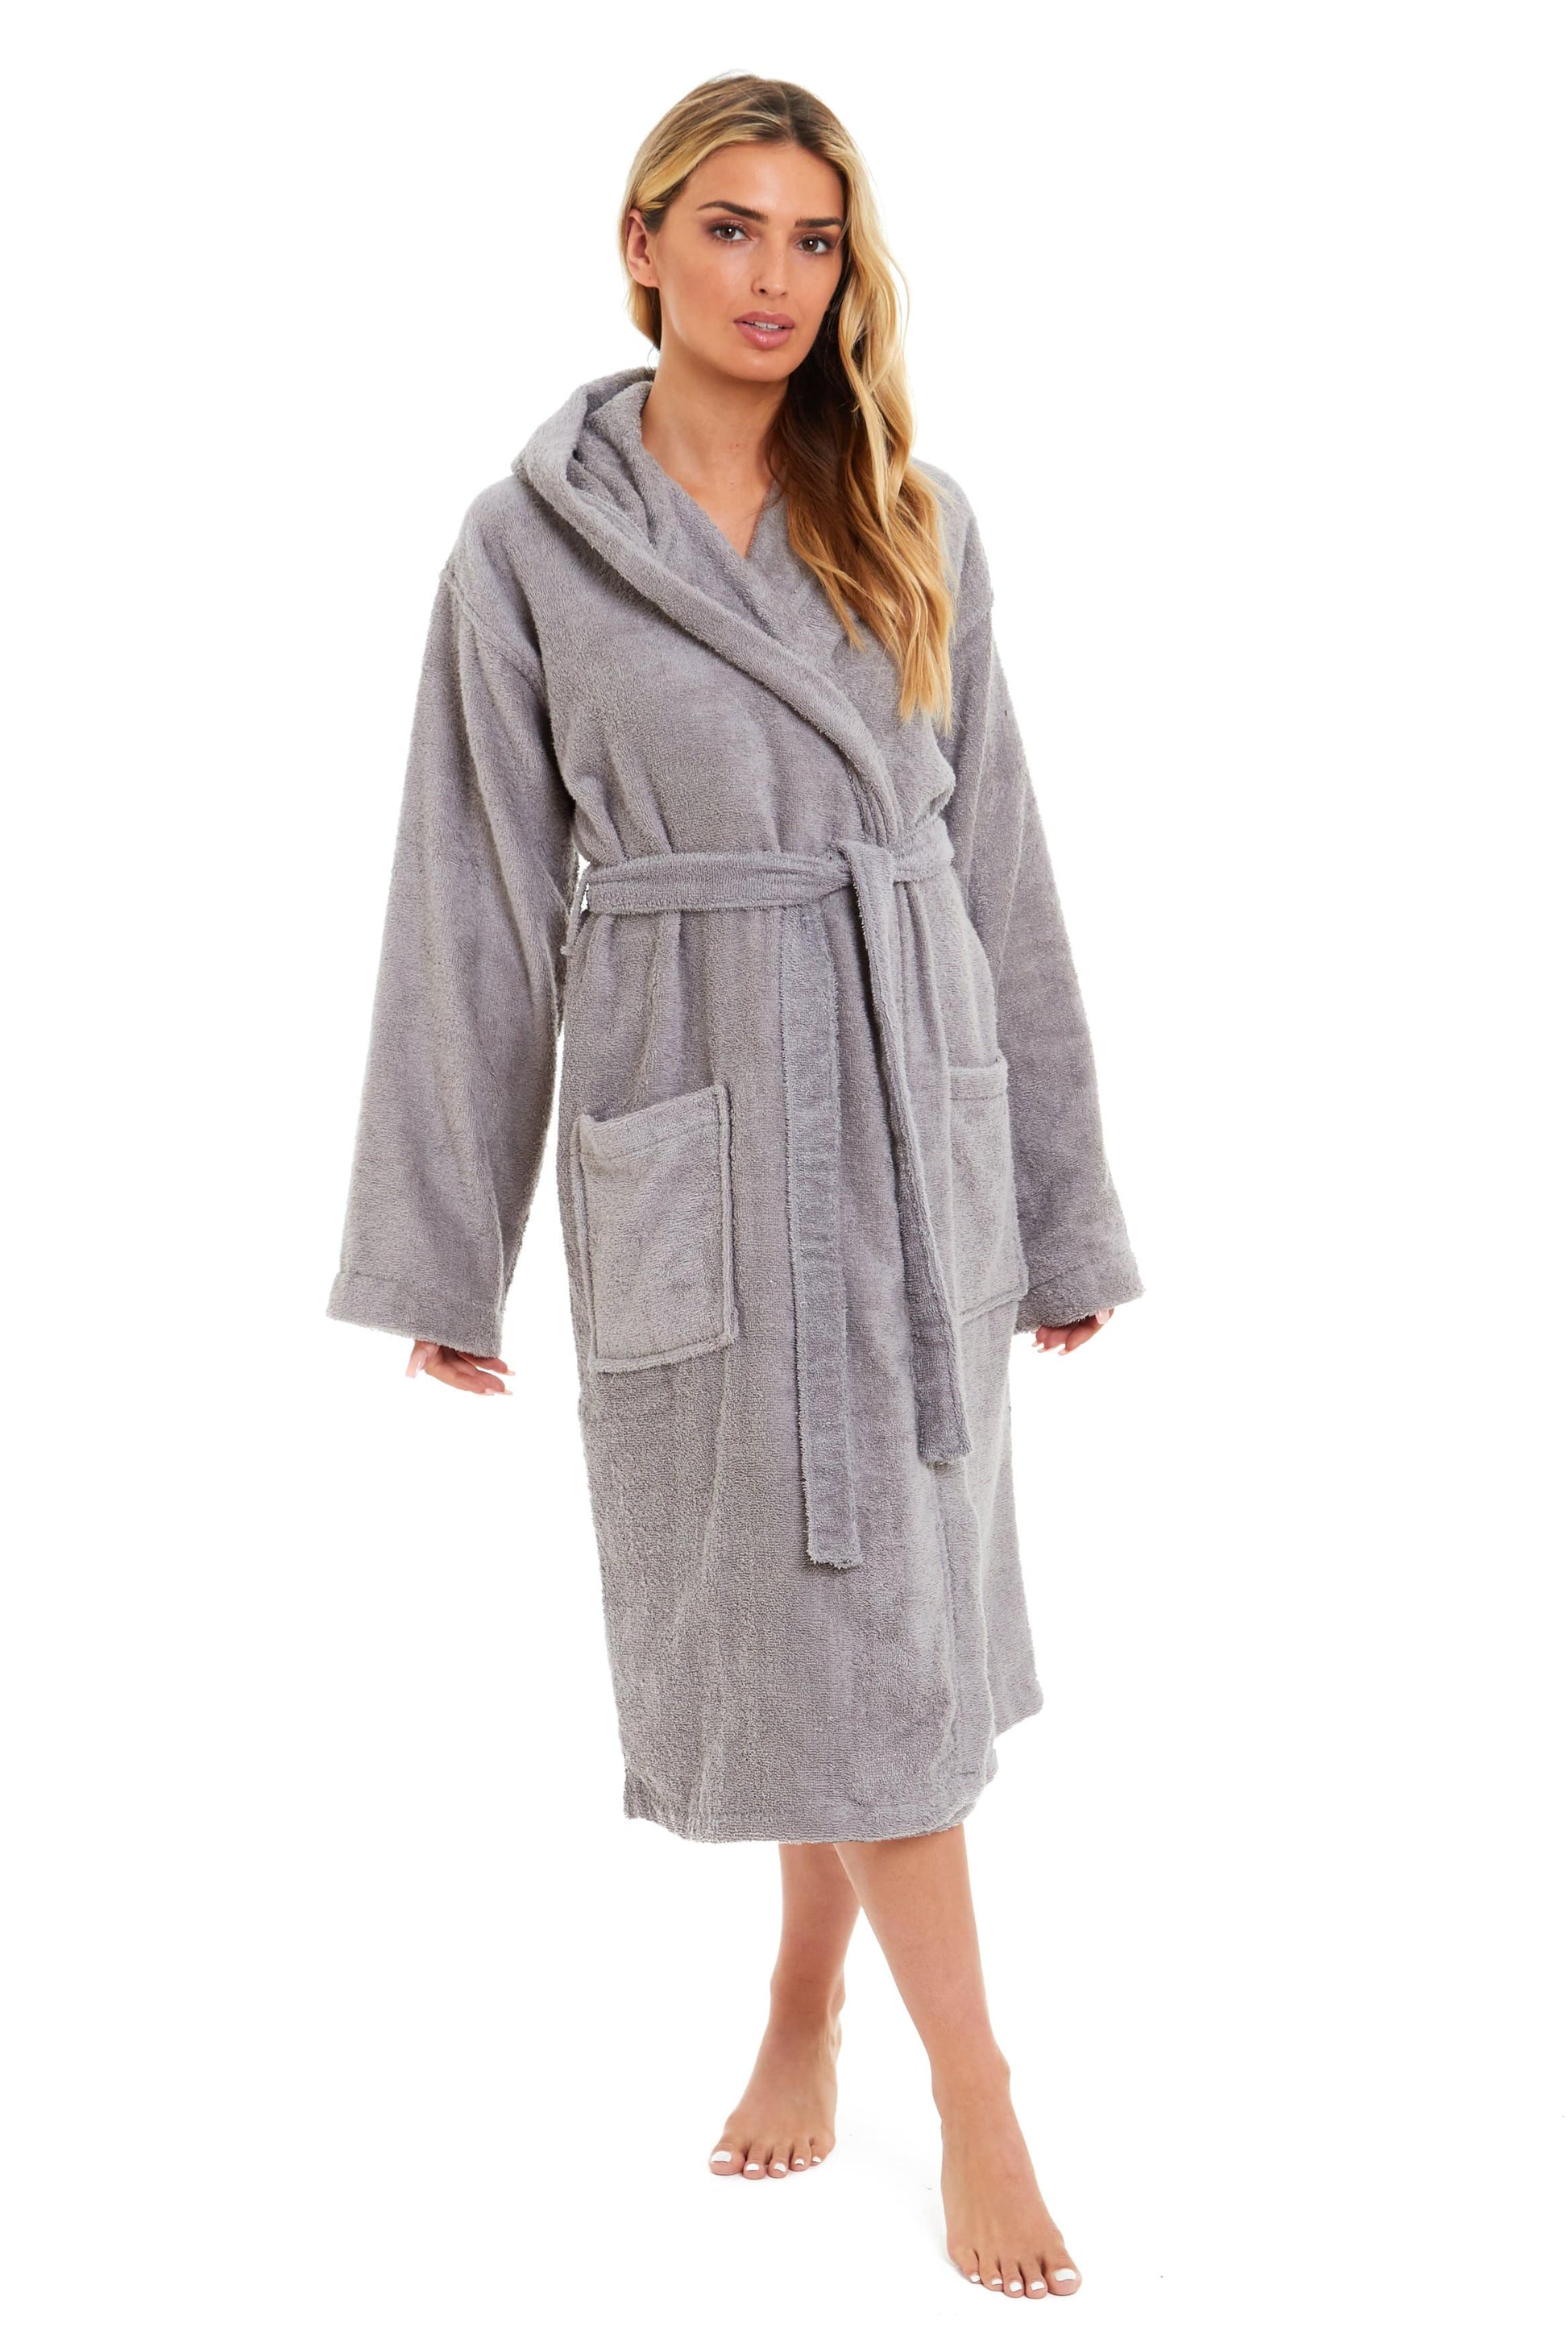 Ladies Luxury Bamboo Hooded Towelling Robe Daisy Dreamer Dressing Gown